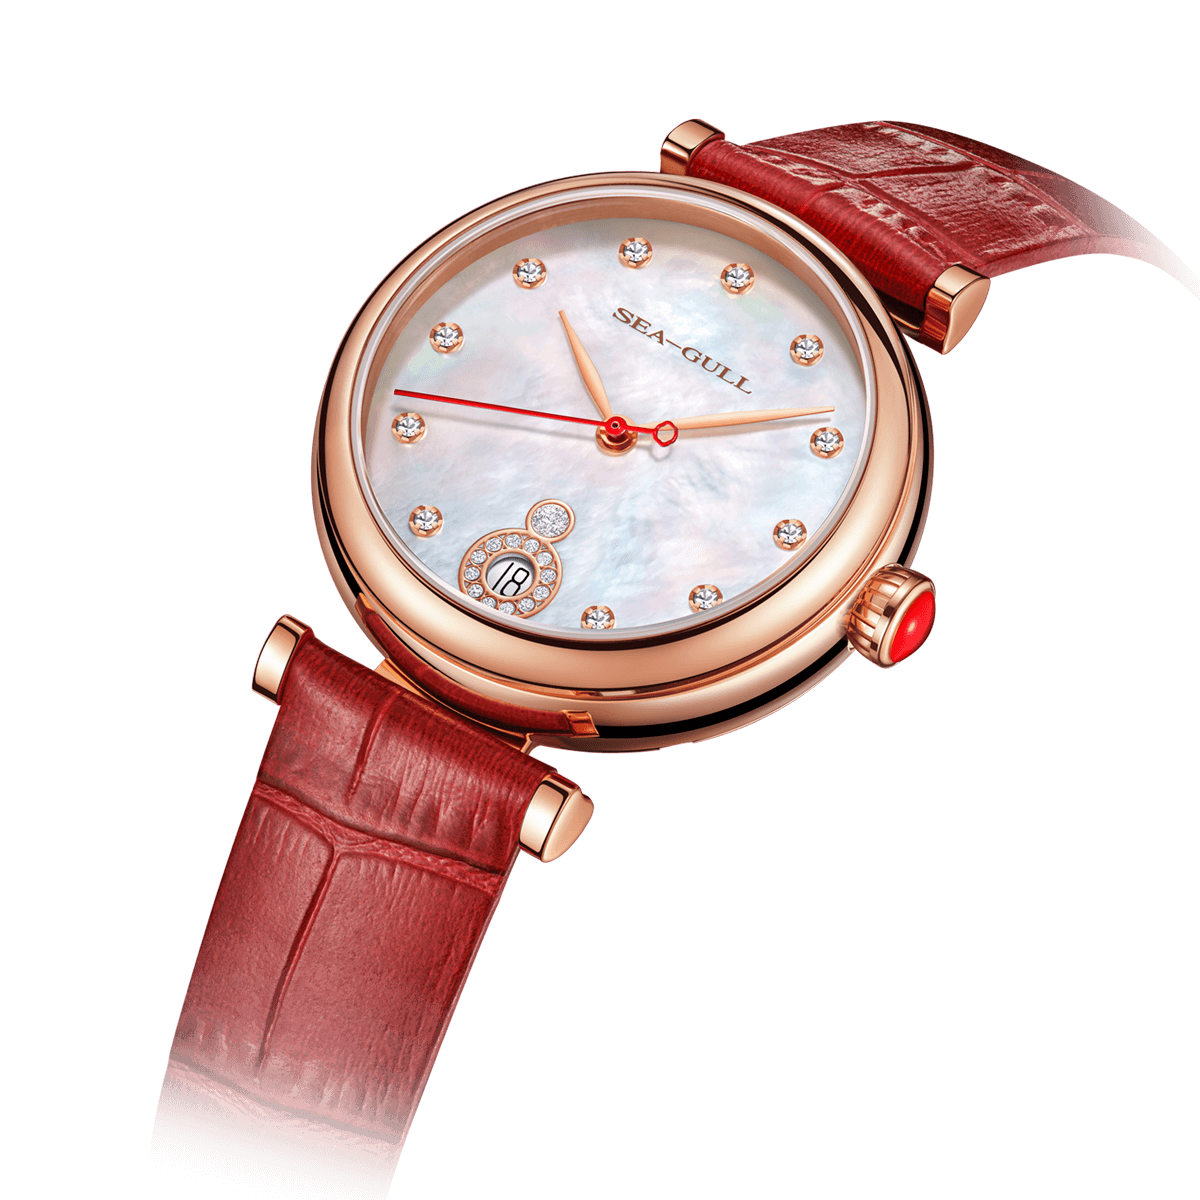 Seagull Watch | Heartfelt Shimmering Mother-of-Pearl Dial Watch 34.5mm